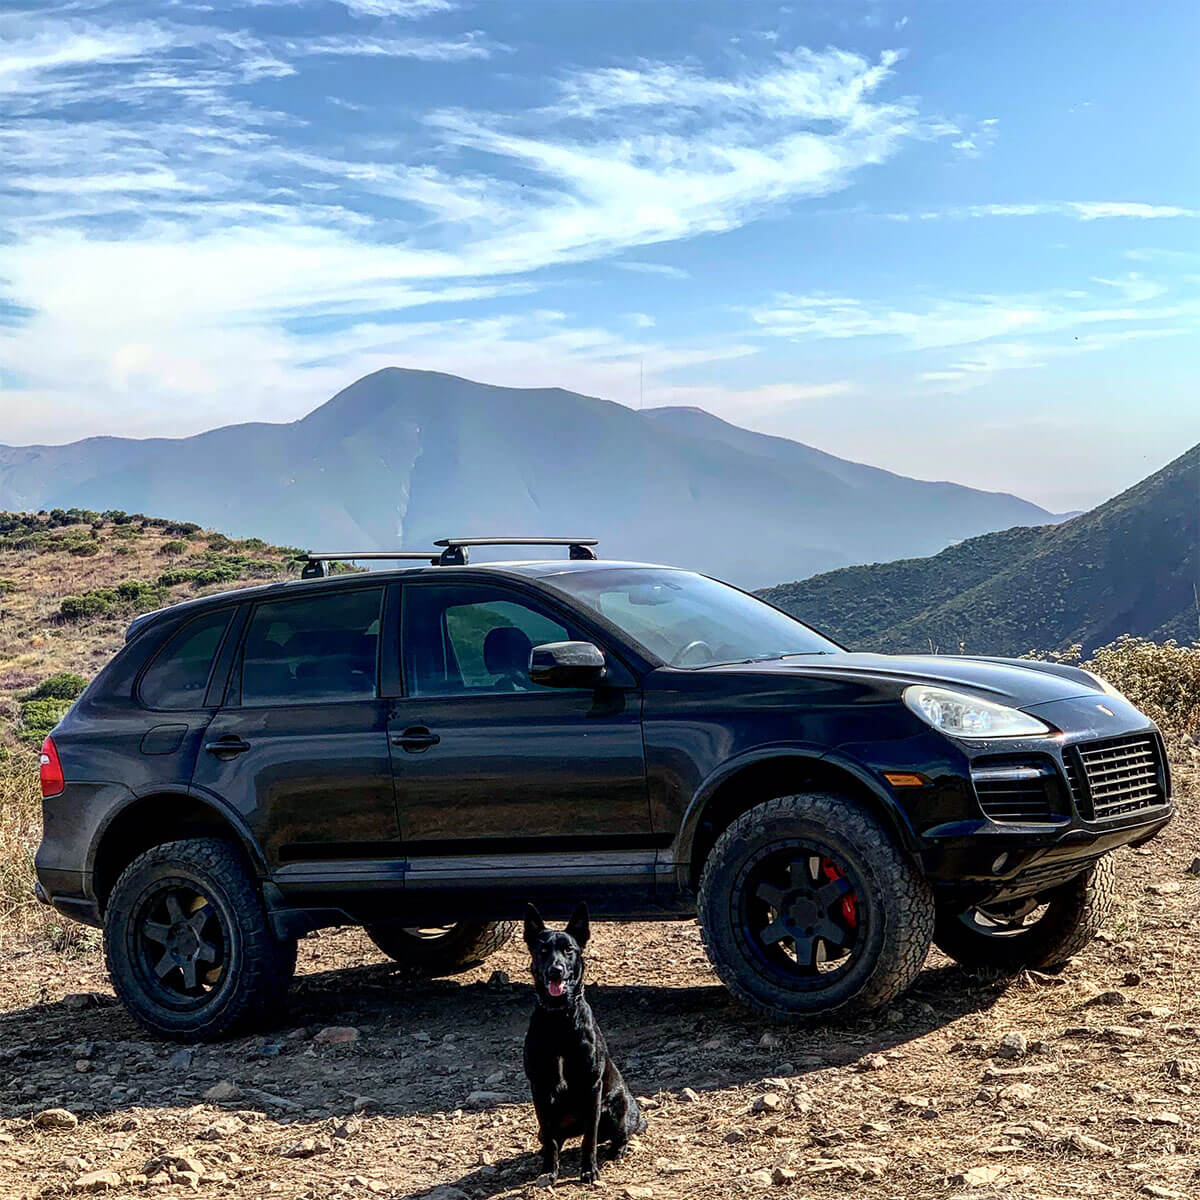 Black Porsche Cayenne with off-road mods and 33 inch mud tires